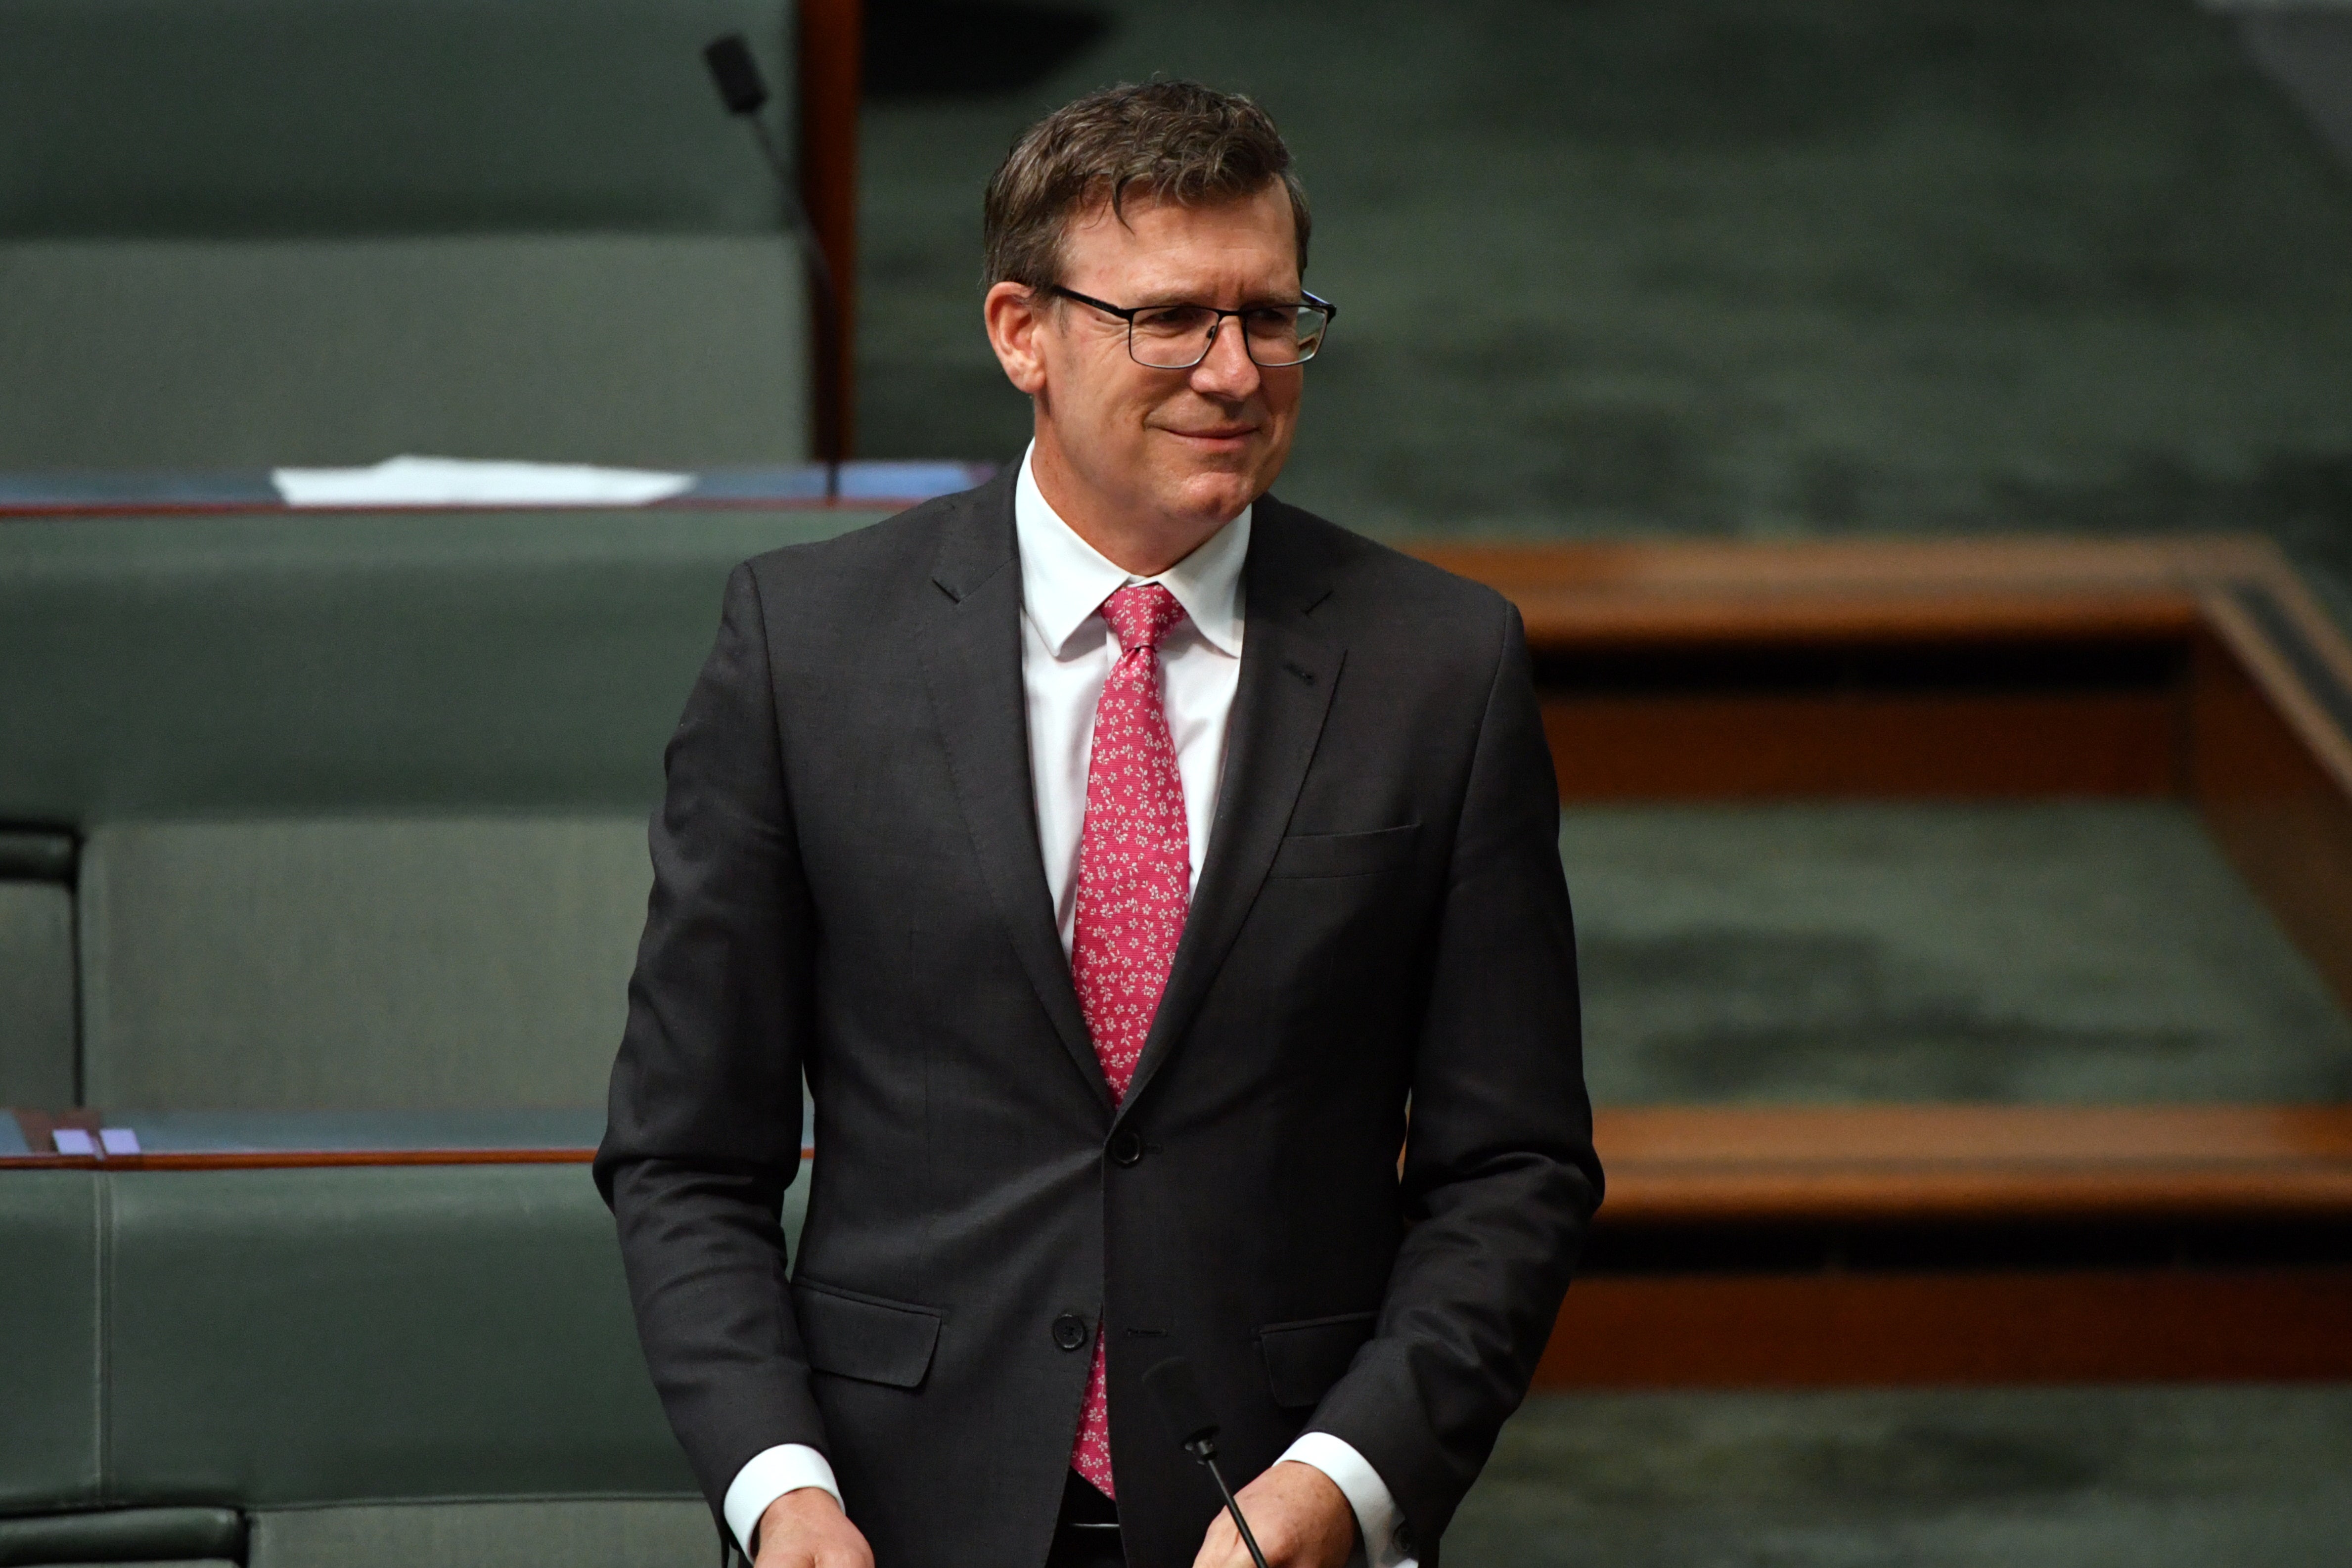 Australian education minister Alan Tudge at a recent parliamentary session